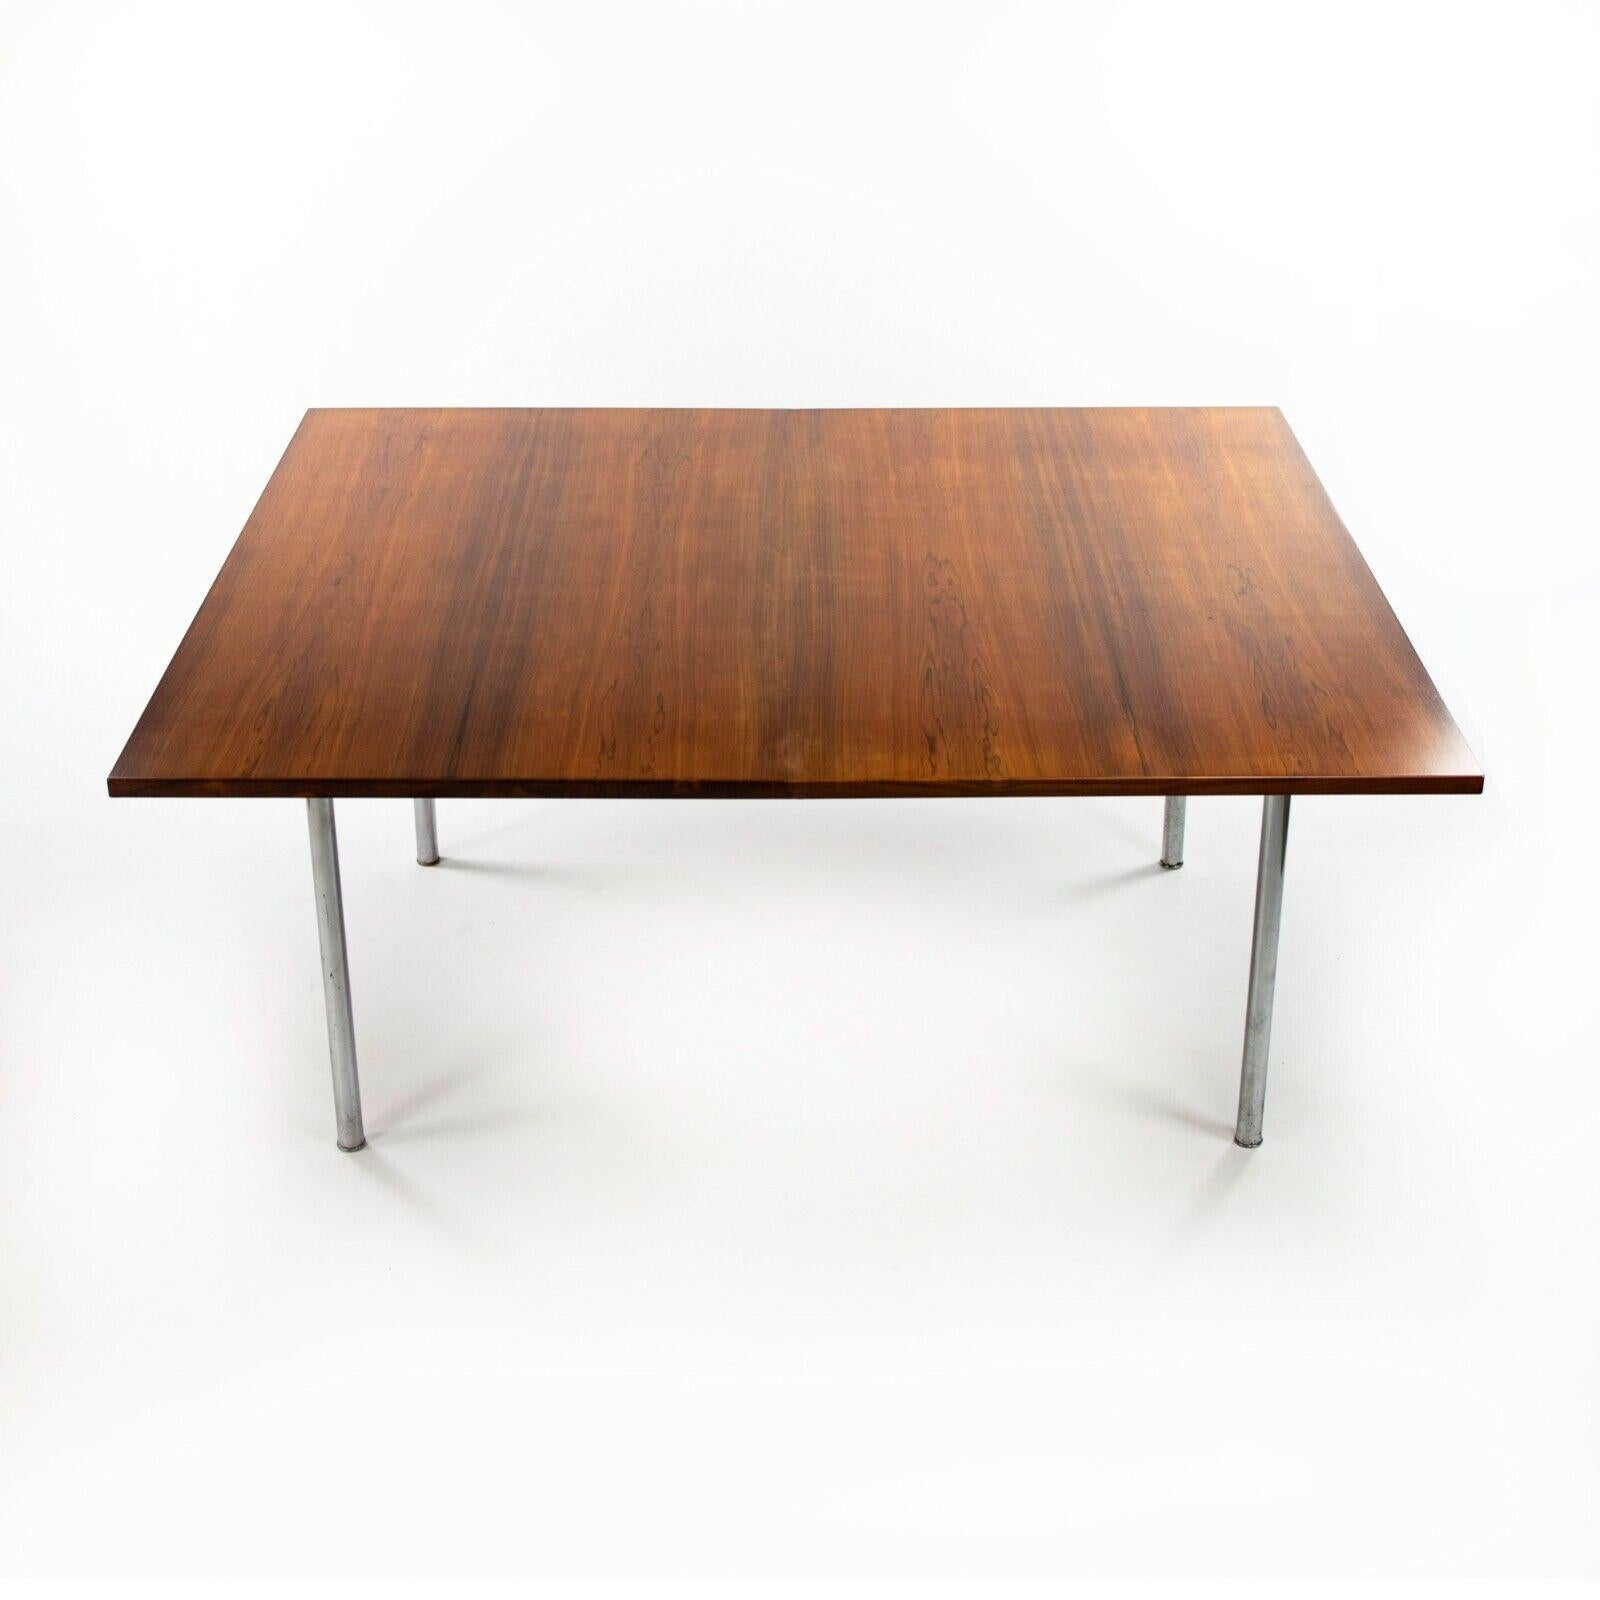 We present a rare AT321 extension dining table, designed by Hans J. Wegner and produced by Andreas Tuck circa 1960. This is one of the most luxurious table designs by Wegner in the most sought after material (Brazilian rosewood). This example has